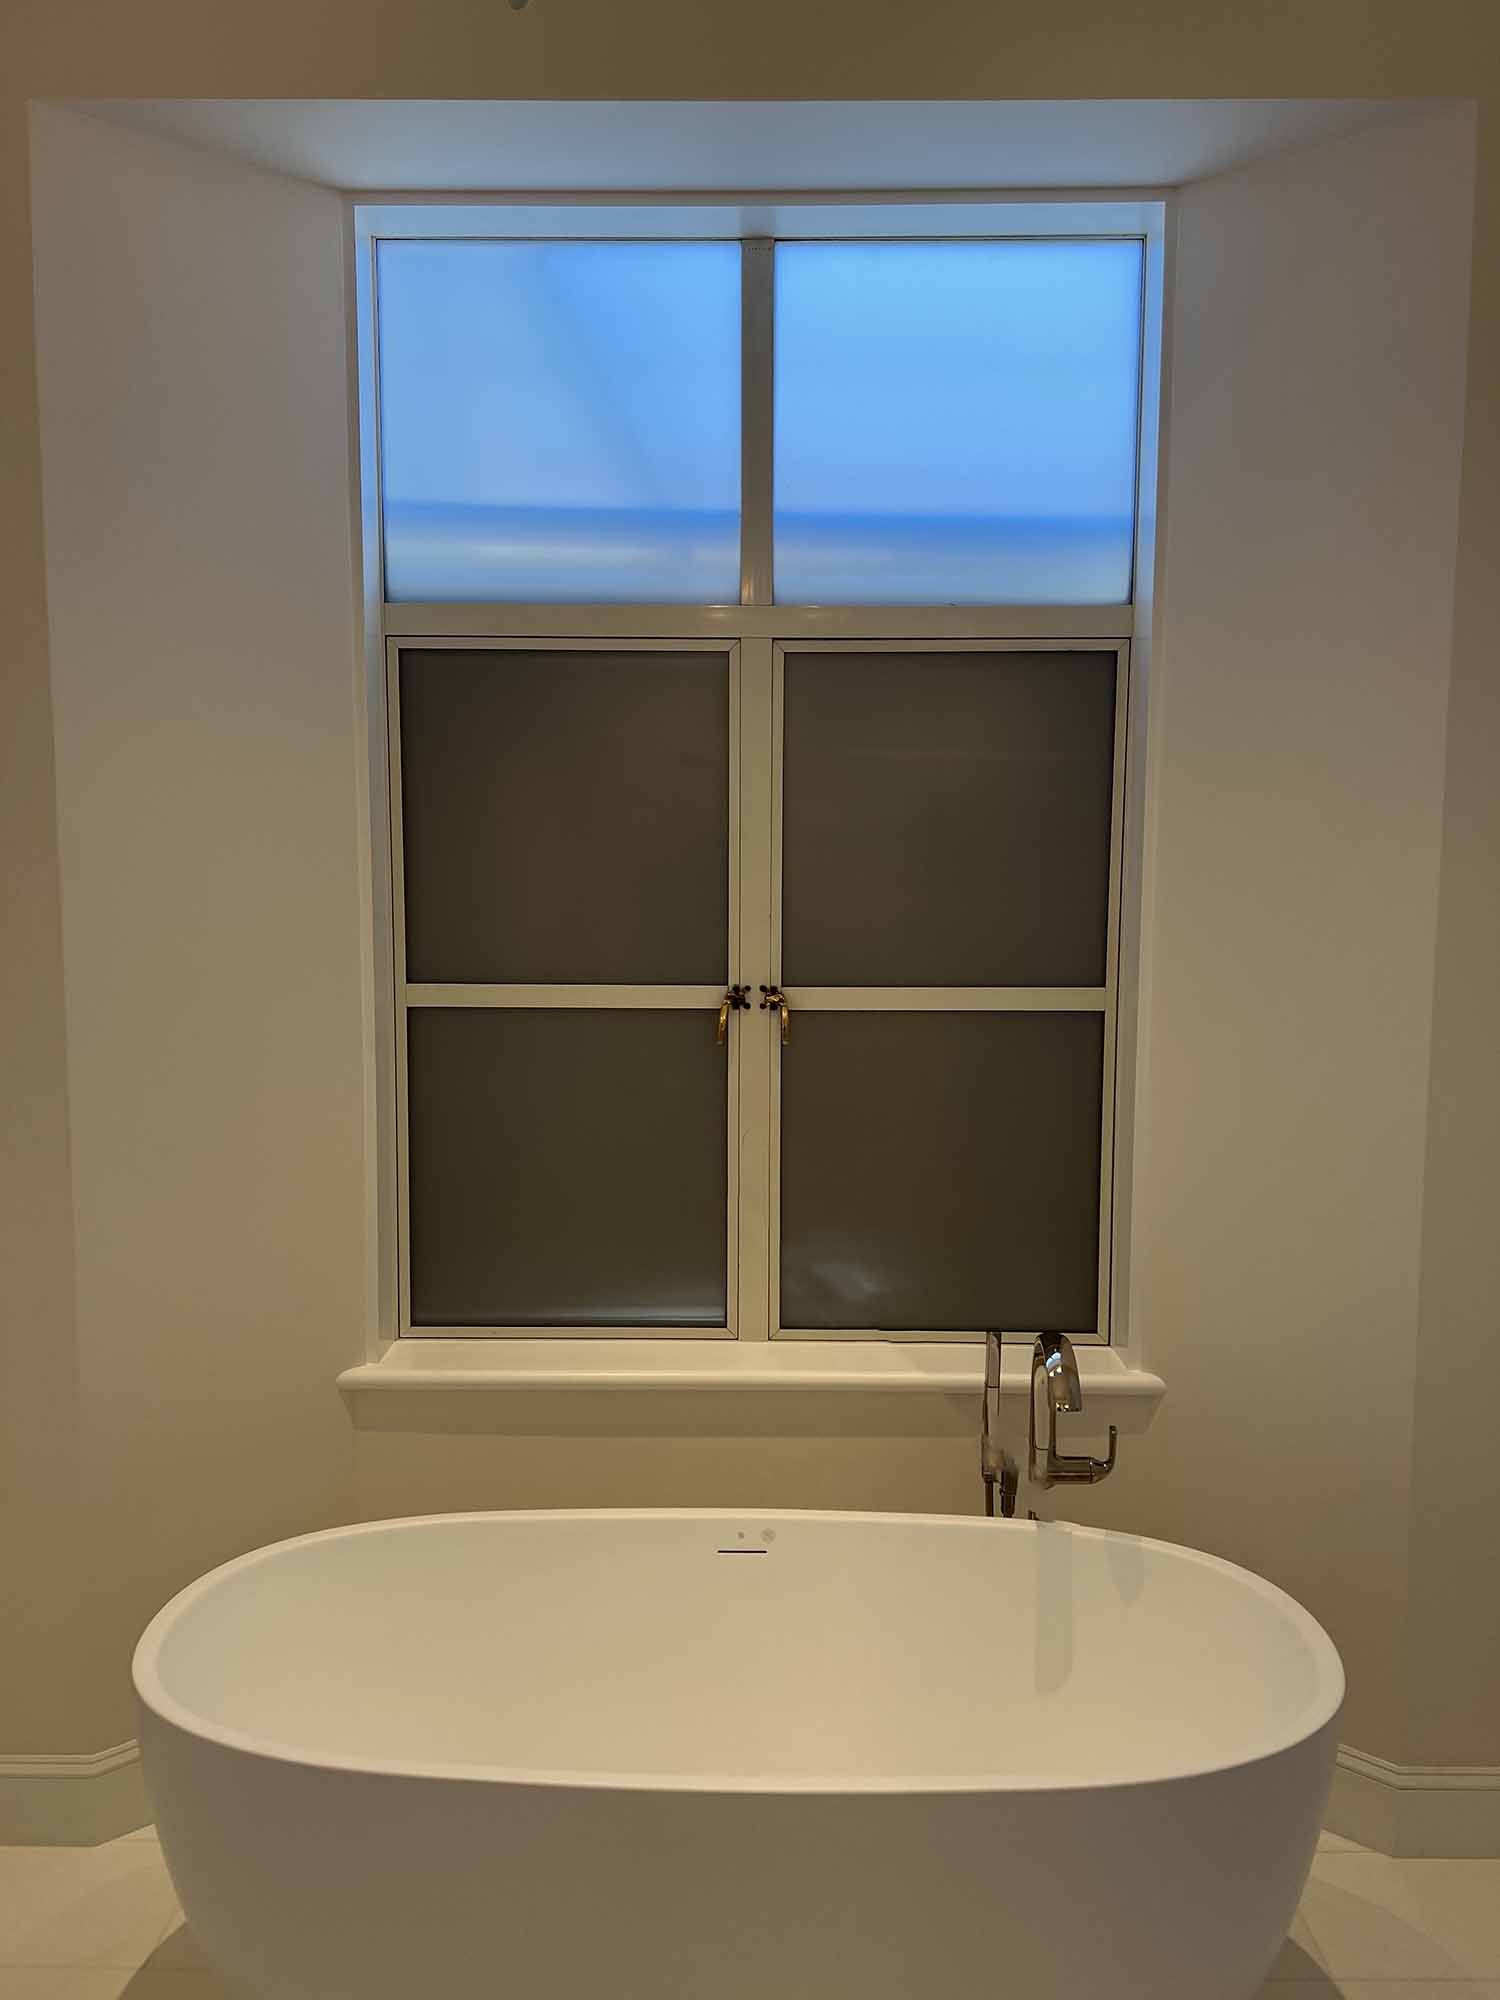 ClimatePro installed Privacy Window Film for a San Francisco Home. Get a free estimate today.